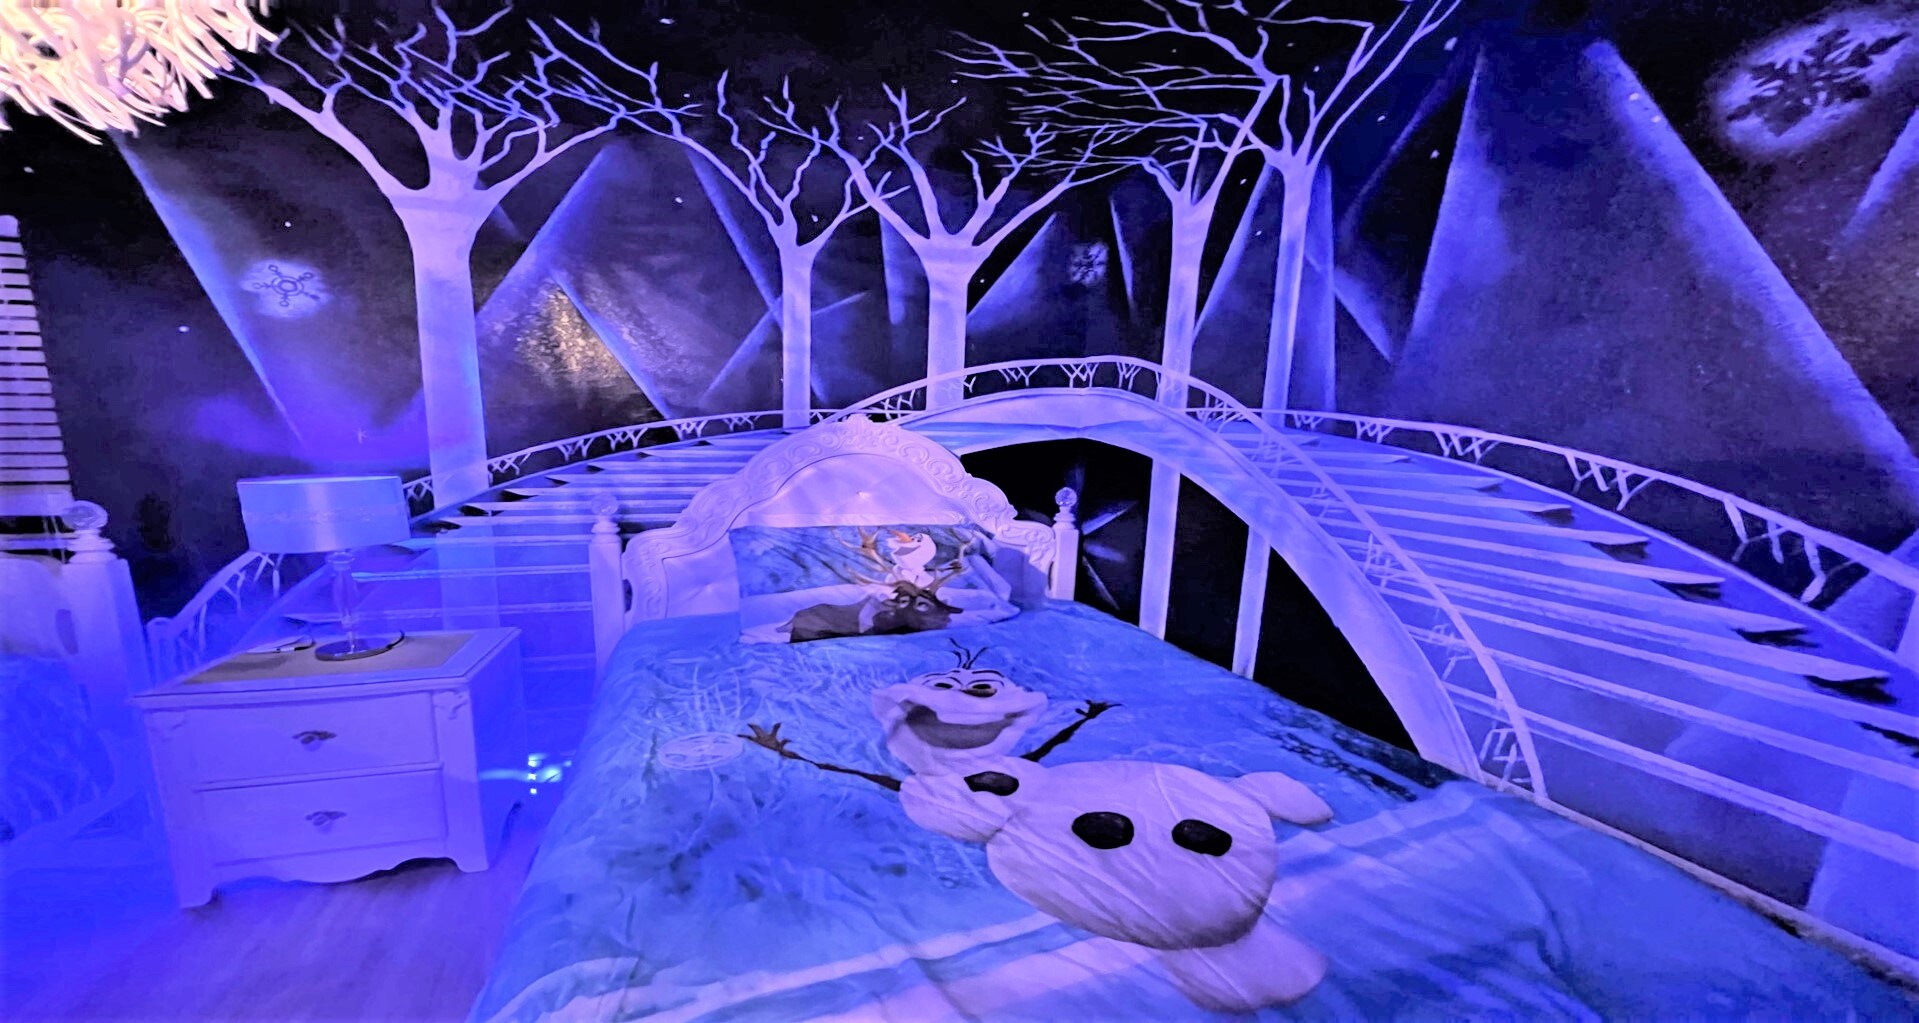 Kids will have fun in this Frozen bedroom with beautiful lights